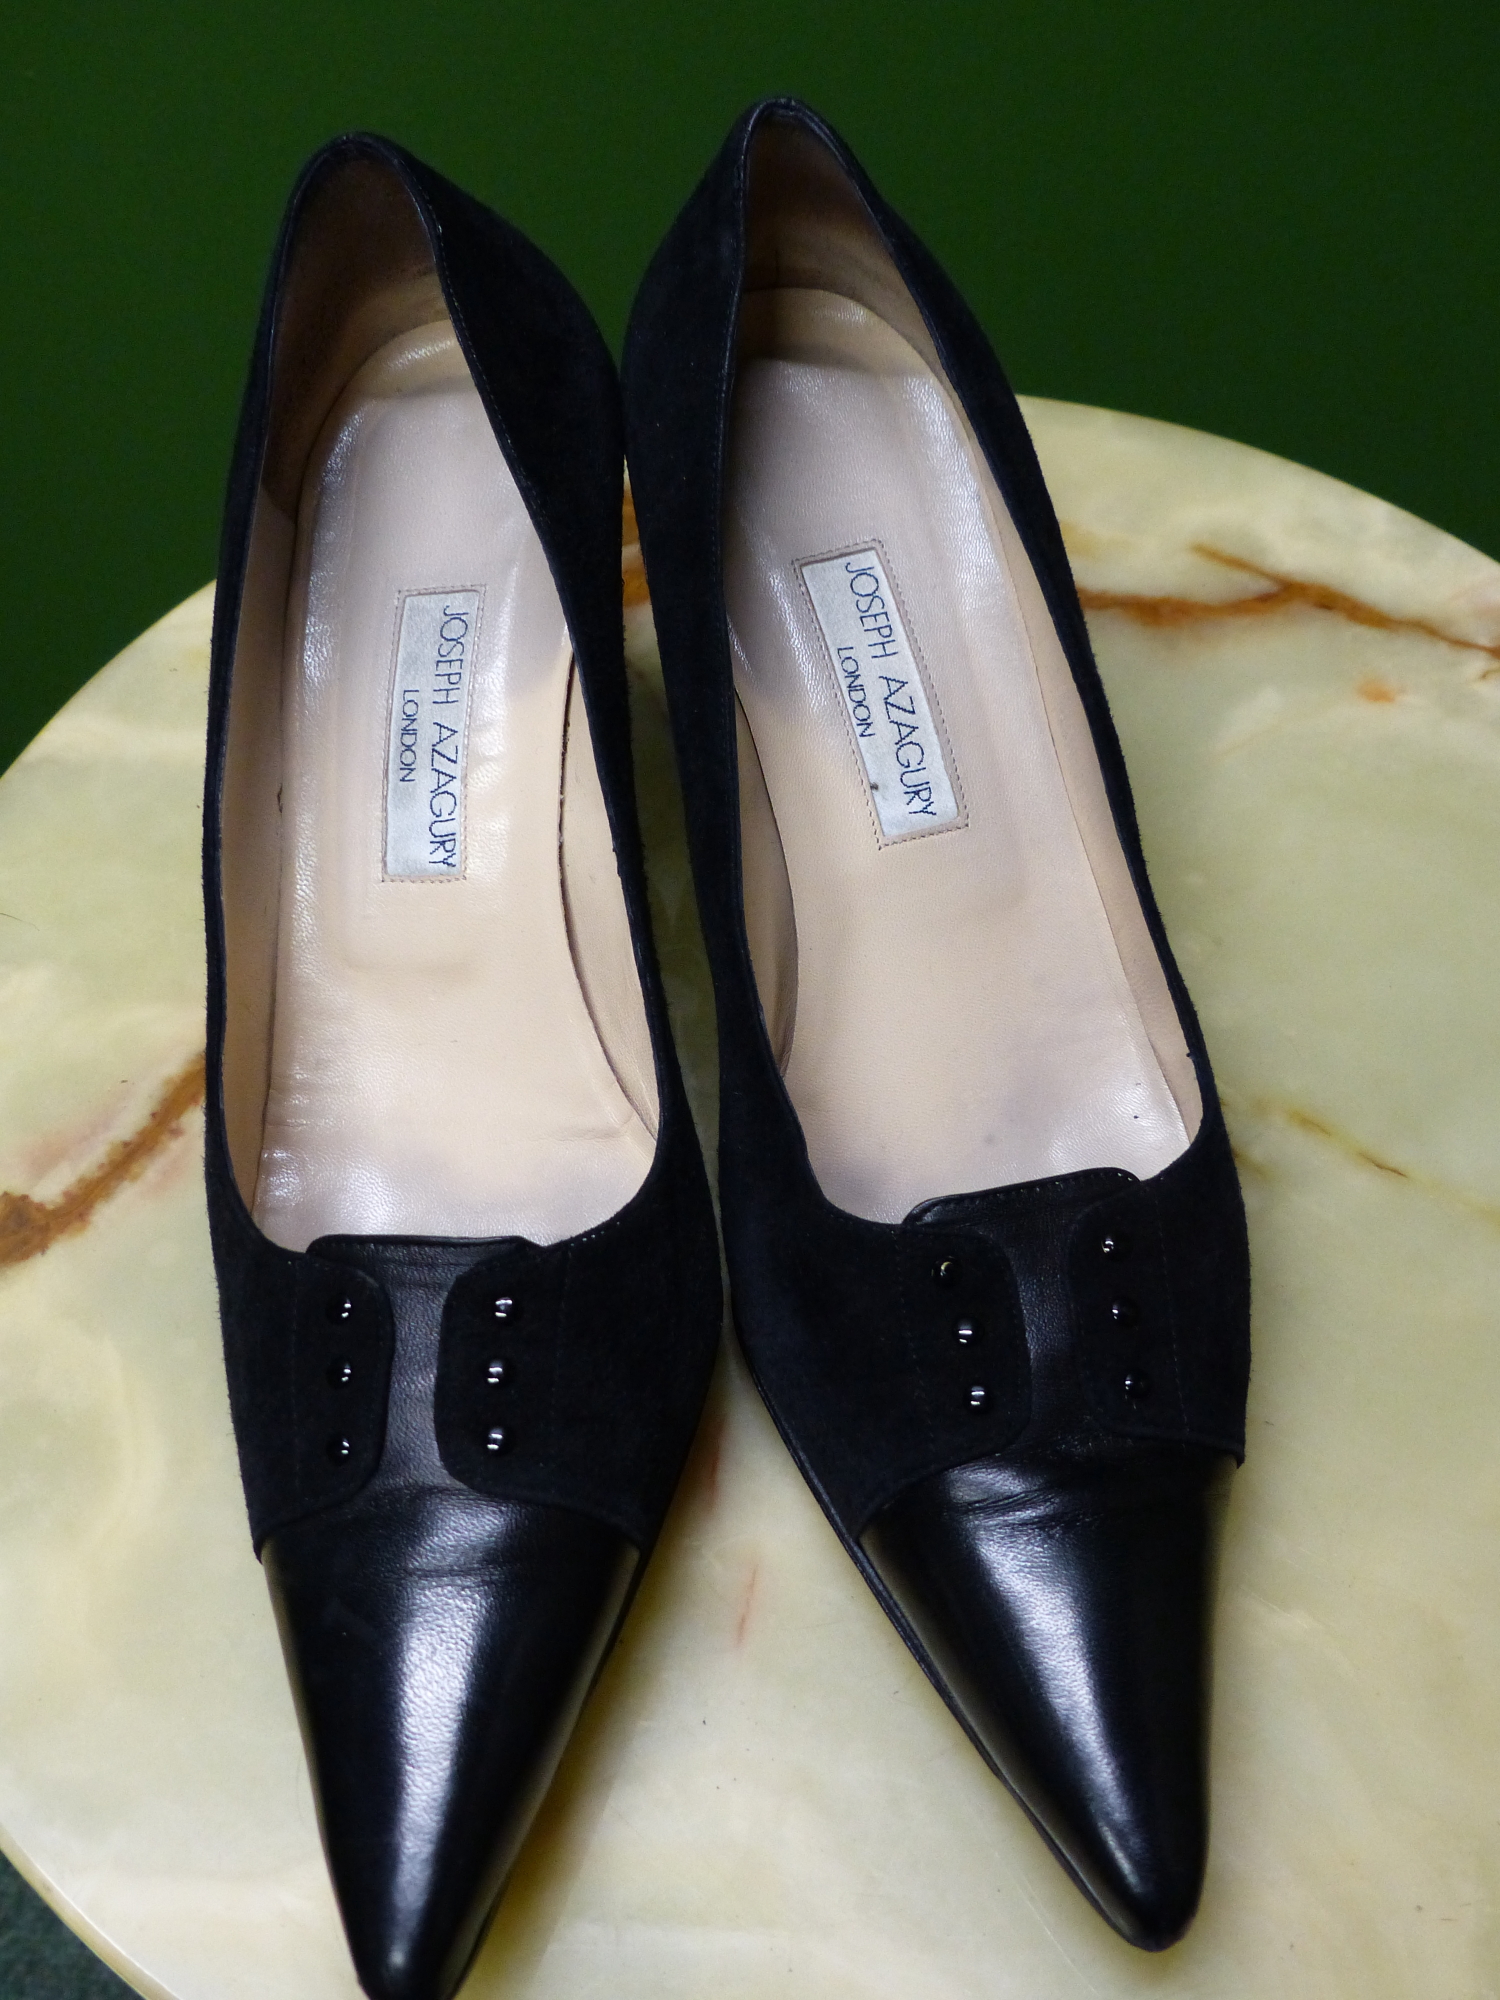 SHOES. THREE PAIR OF JOSEPH AZAGURY LONDON. SUEDE BROWN FLATS EUR SIZE 39. BLACK LEATHER AND SUEDE - Image 9 of 15